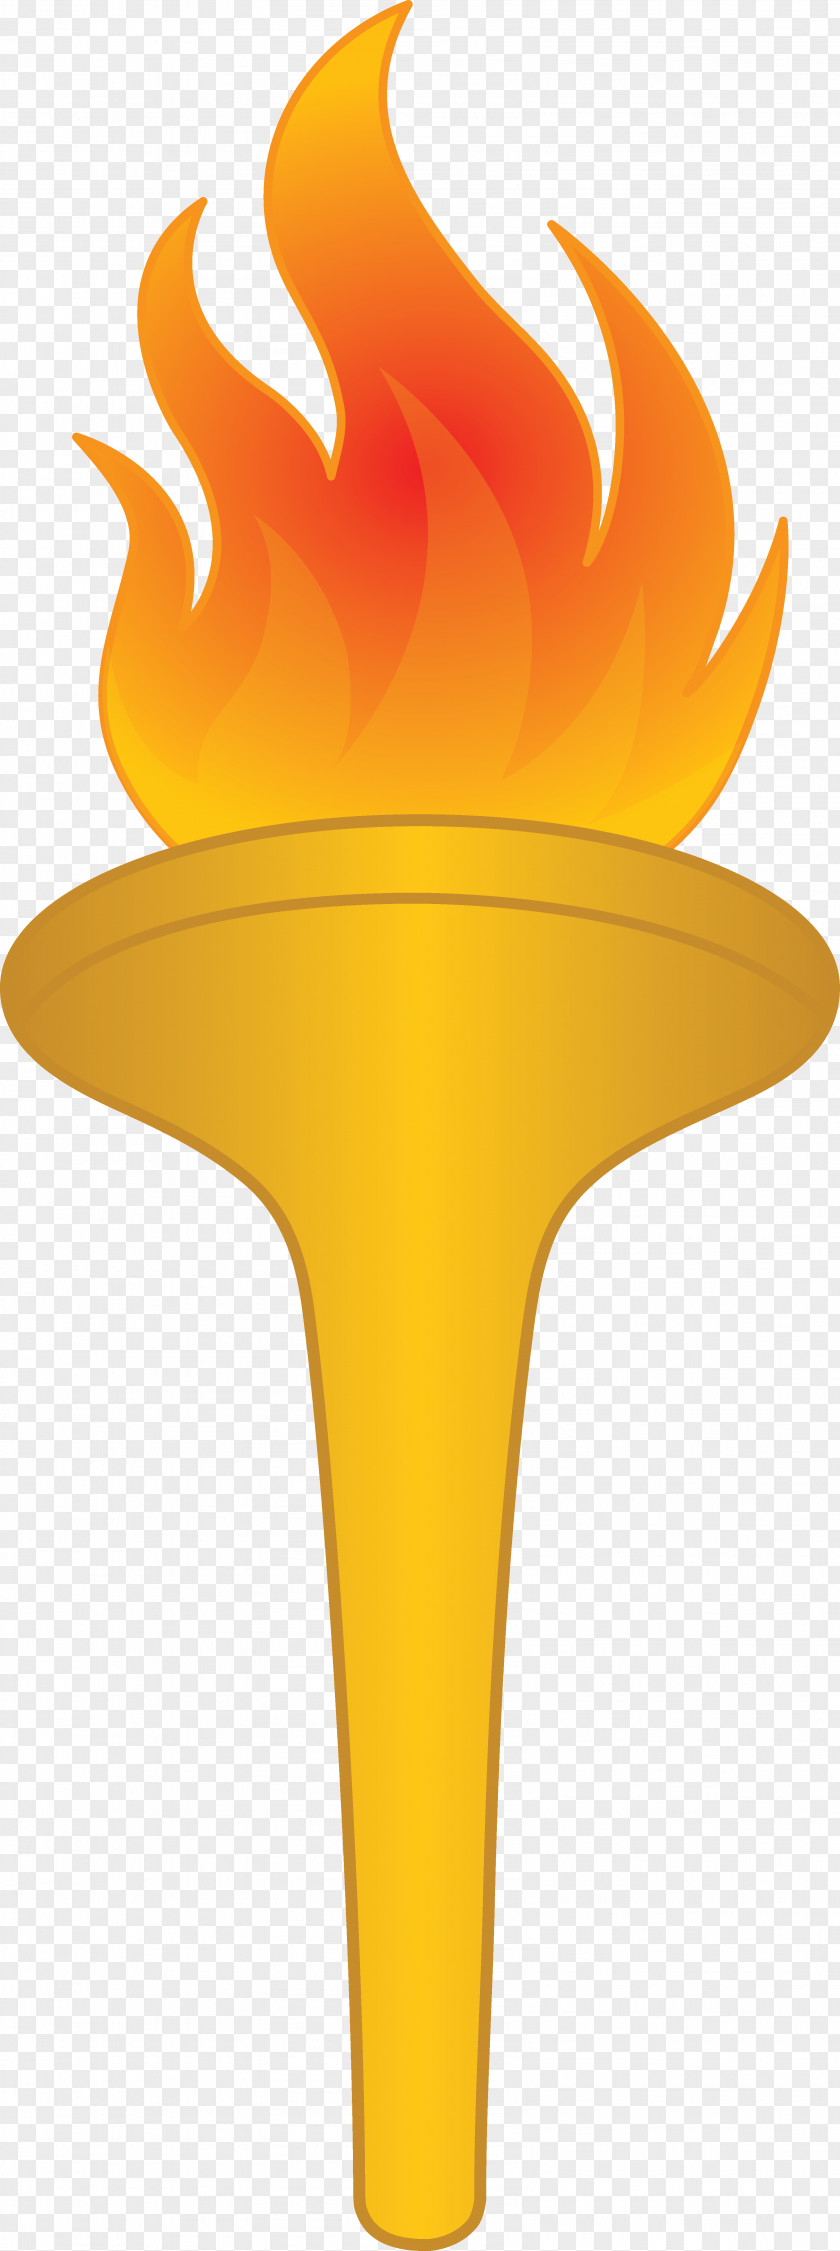 Fda Cliparts Winter Olympic Games Flame Torch Clip Art PNG